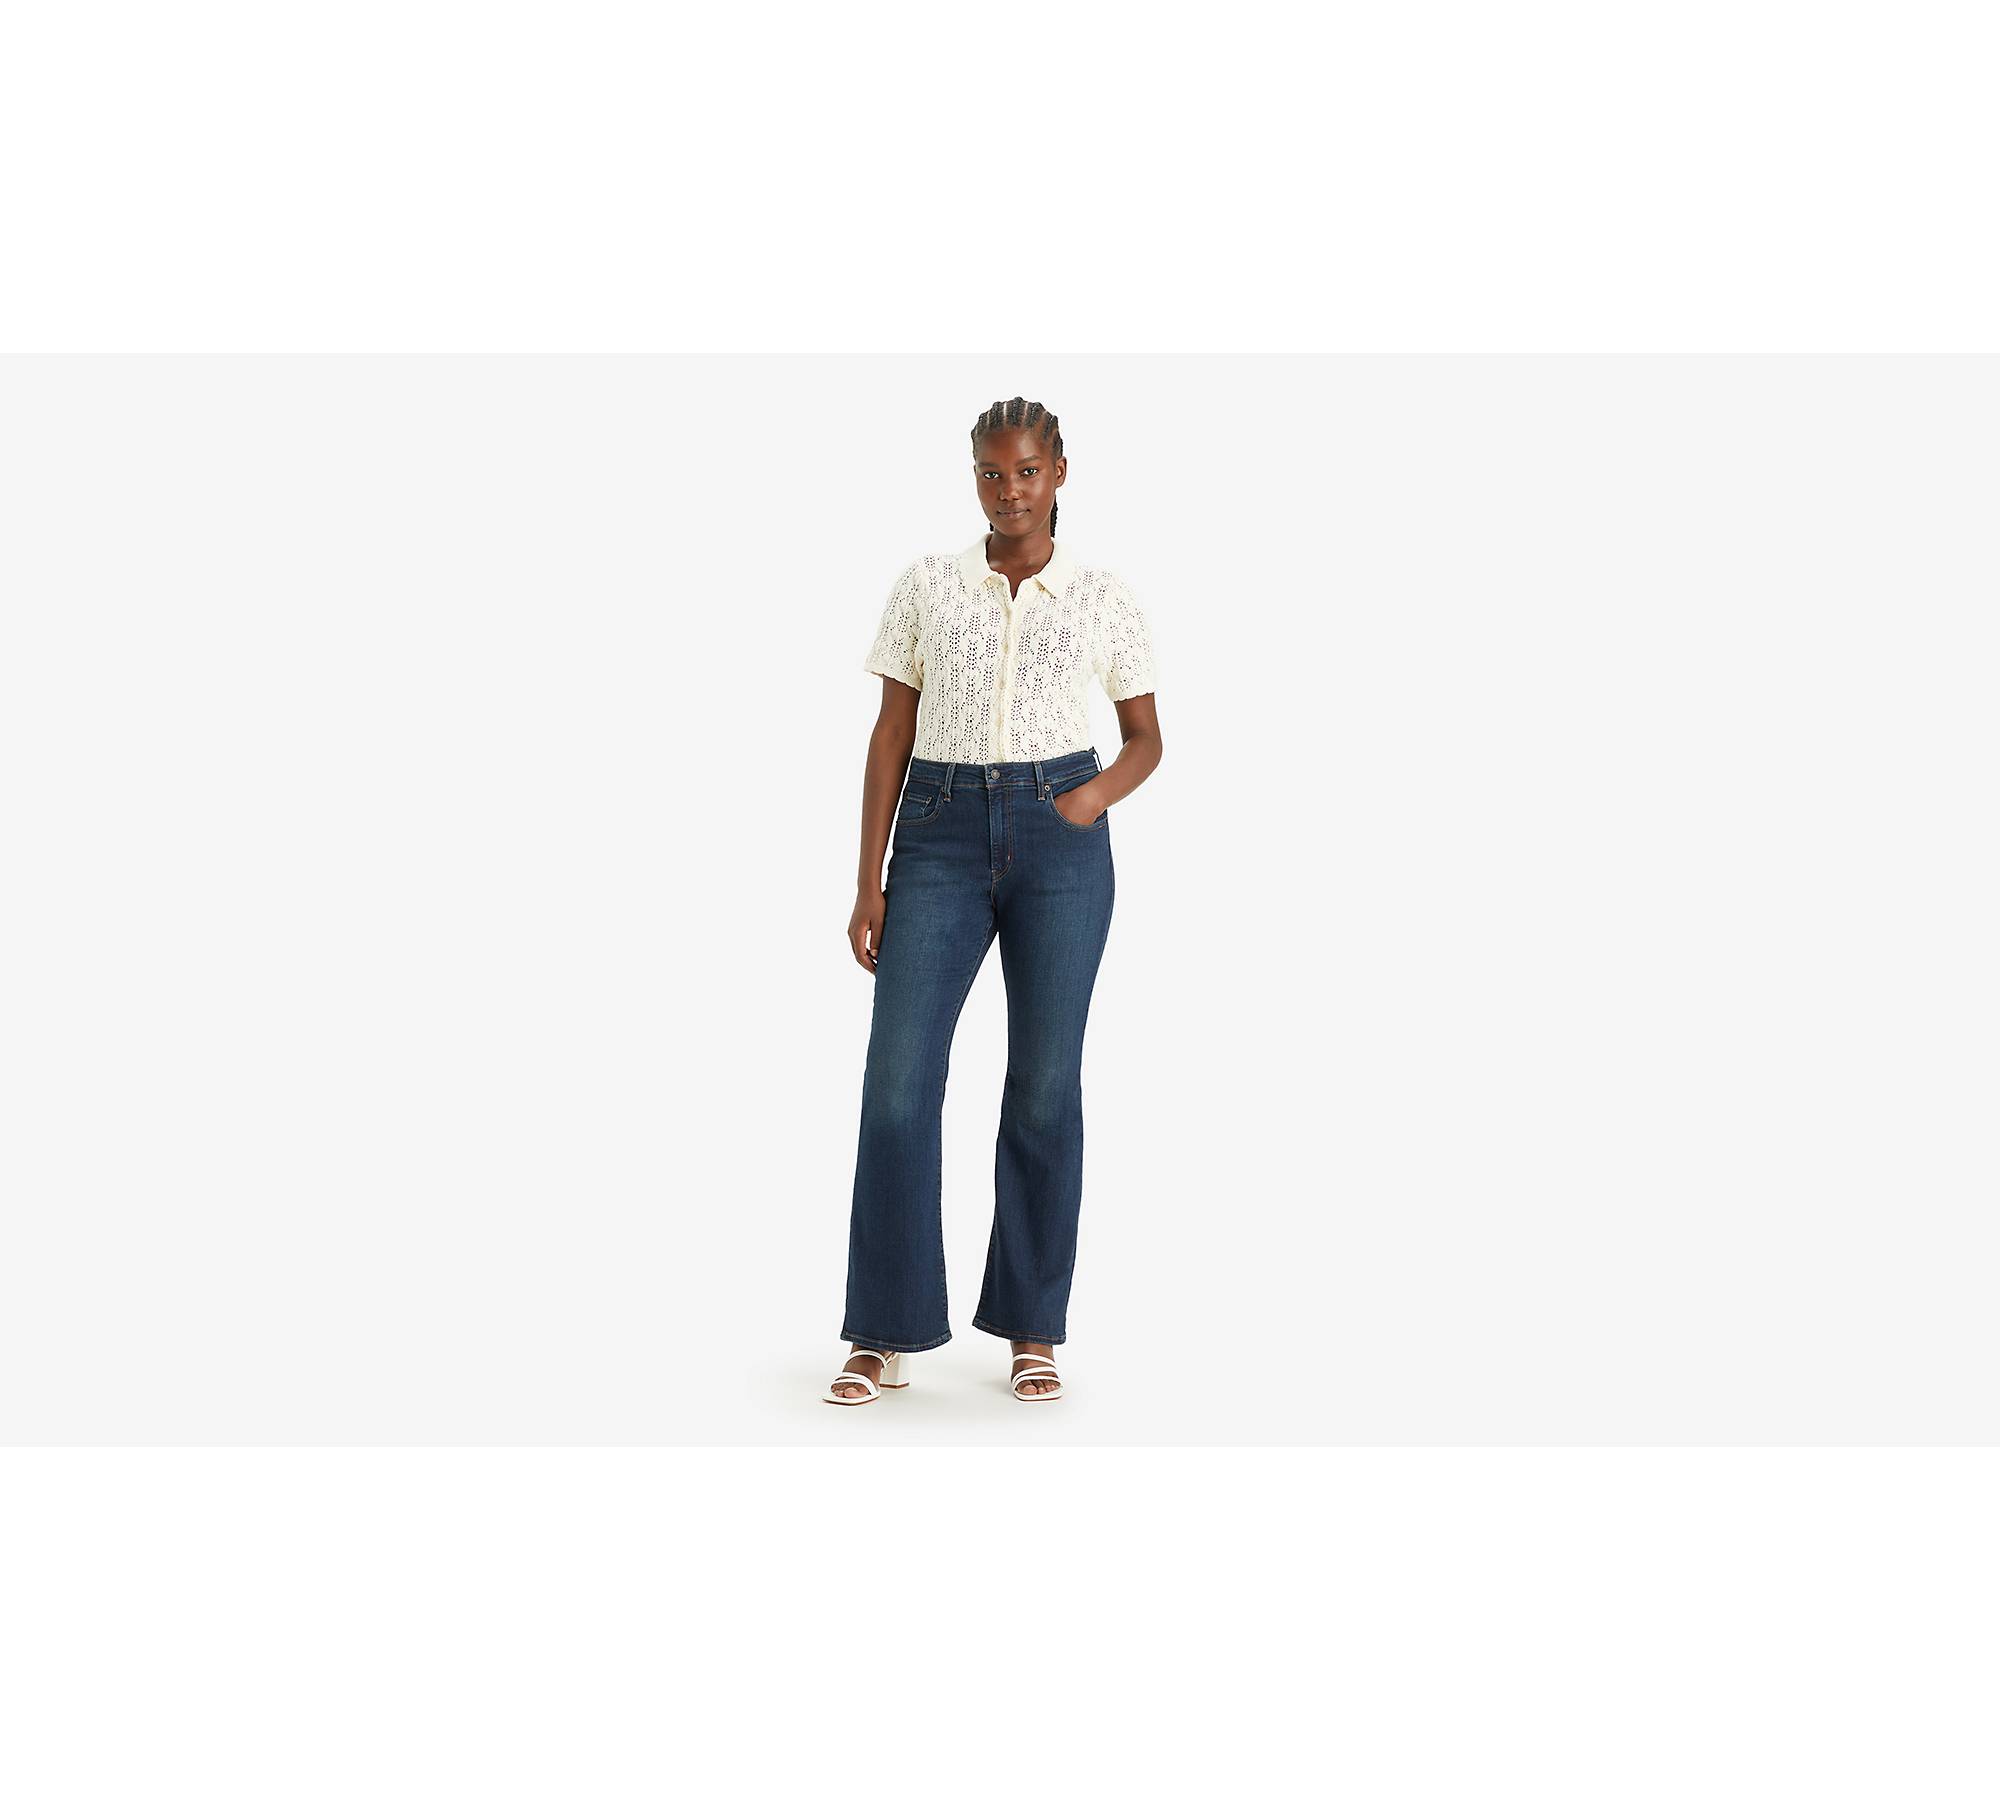  GAP Girls High Rise Flare Jeans Light WASH 5: Clothing